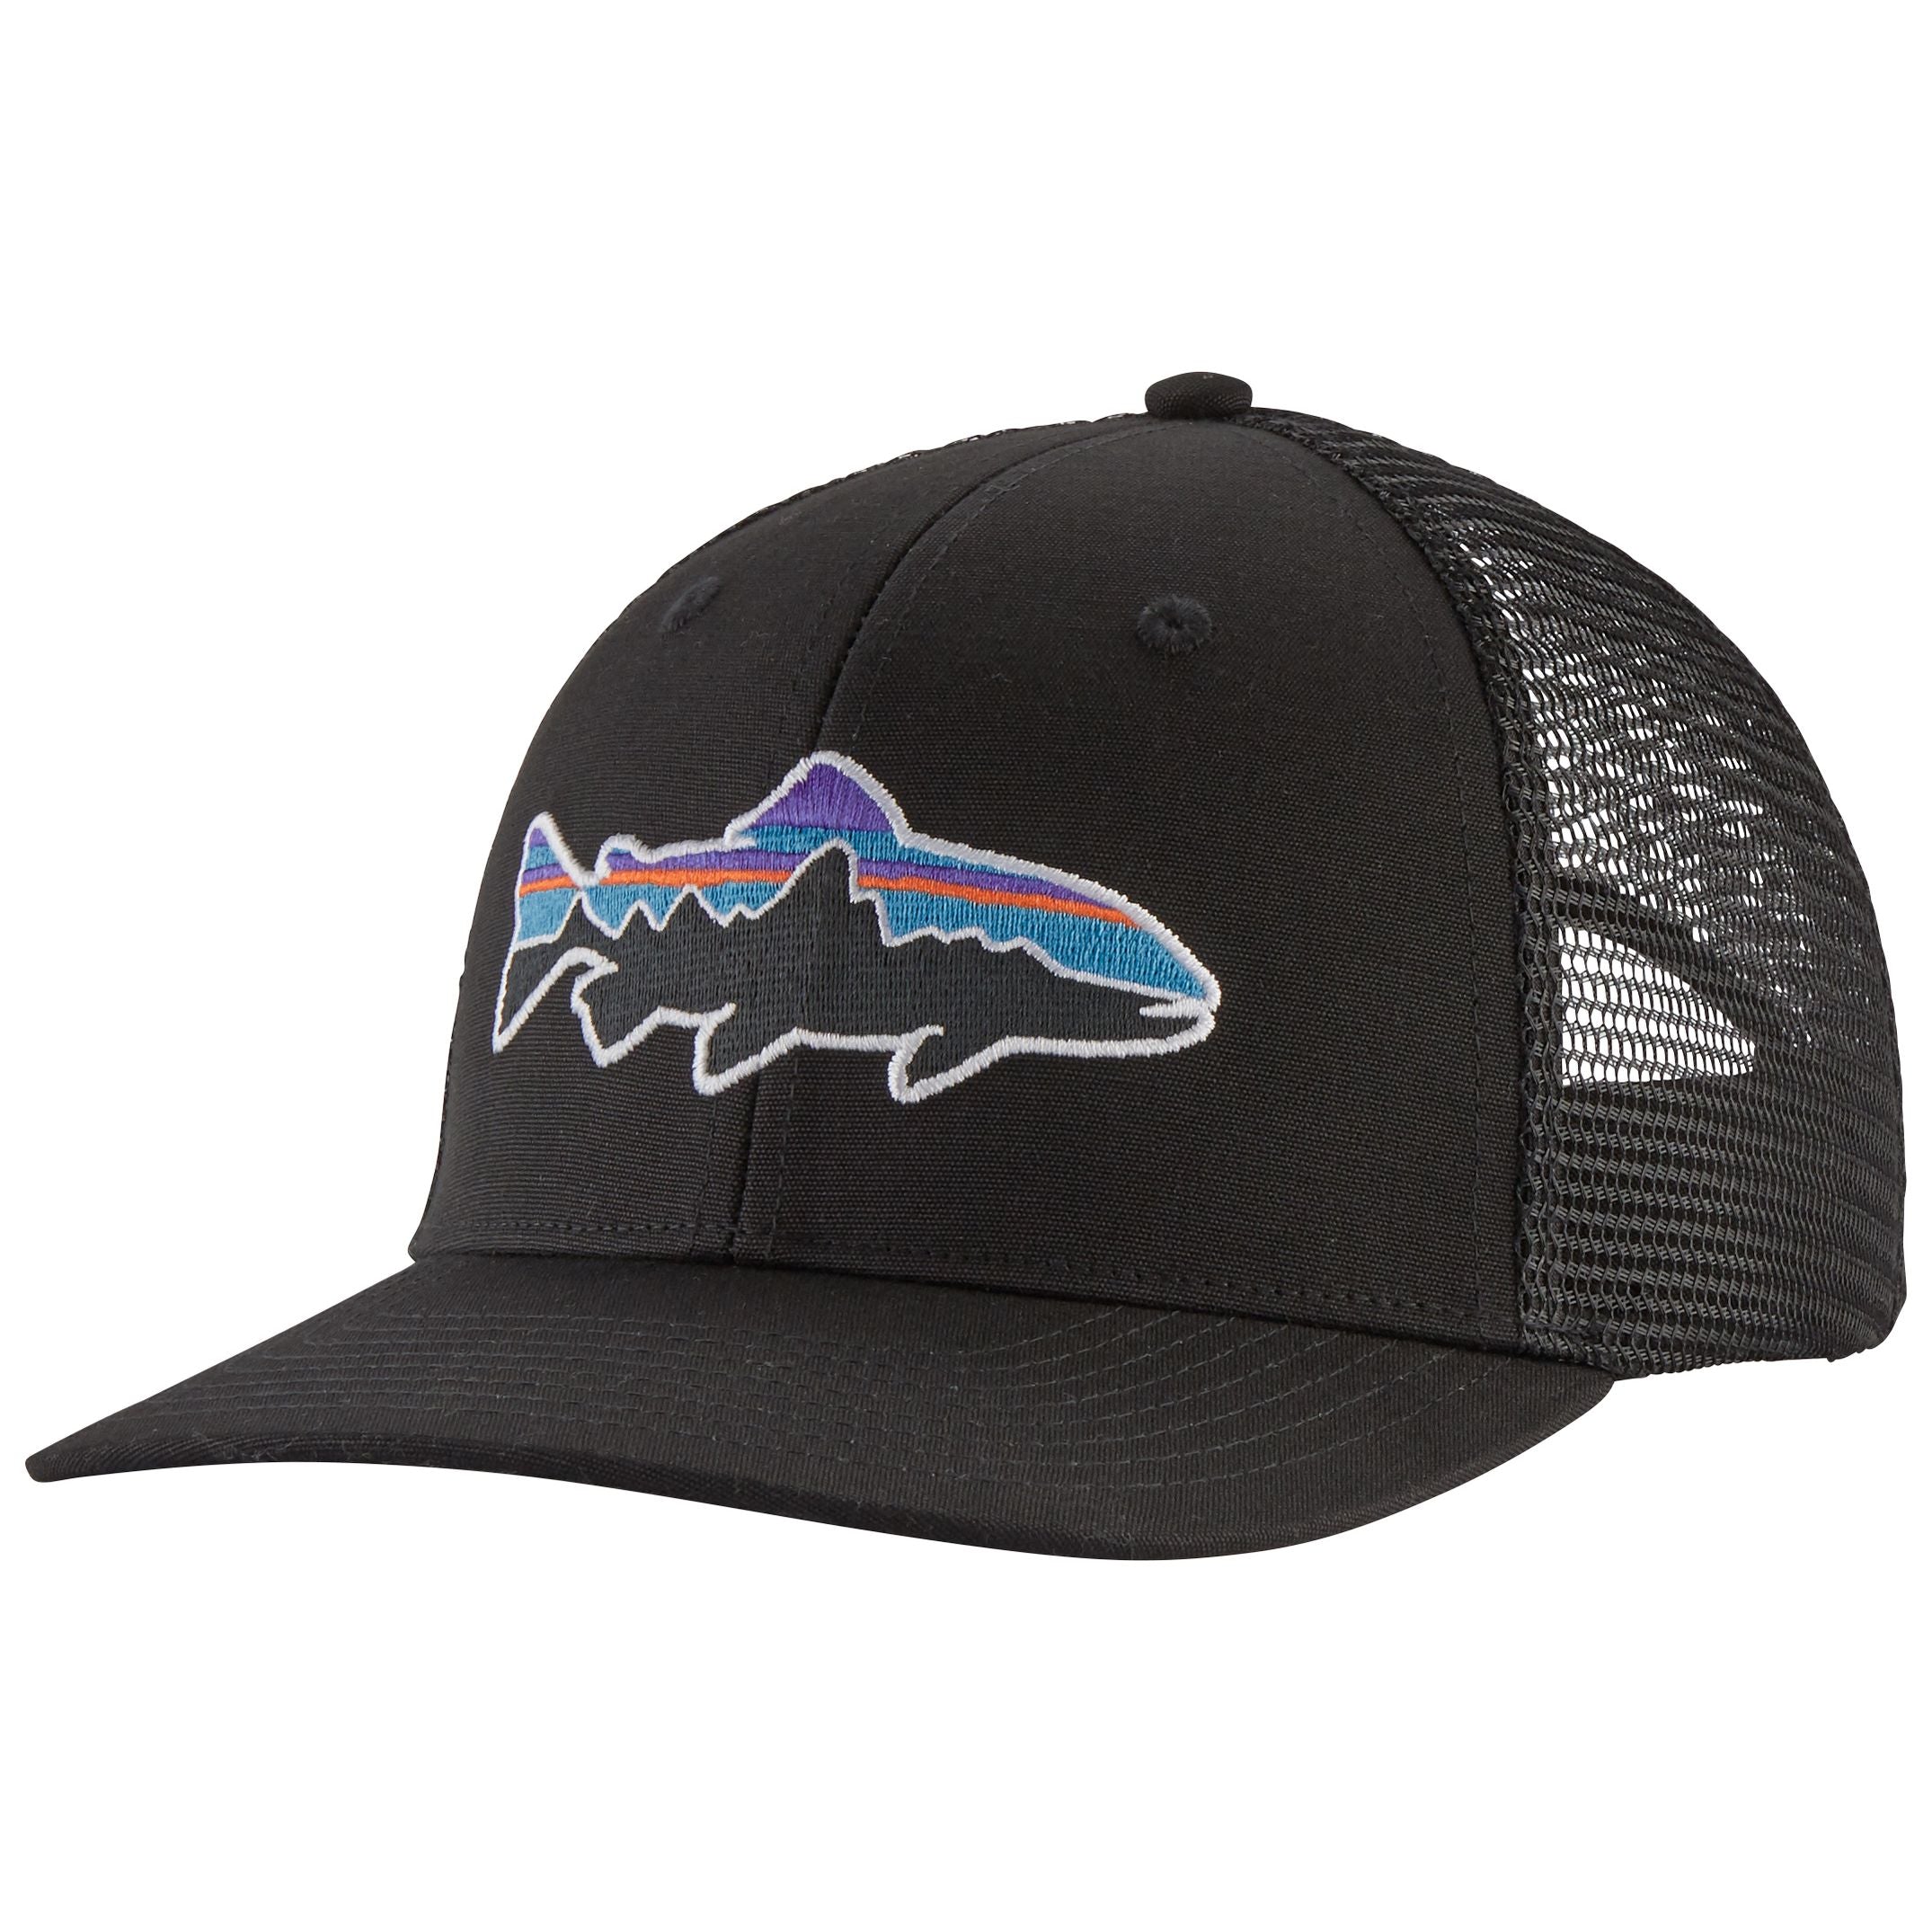 Patagonia Fitz Roy Trout Trucker Hat Black Image 01